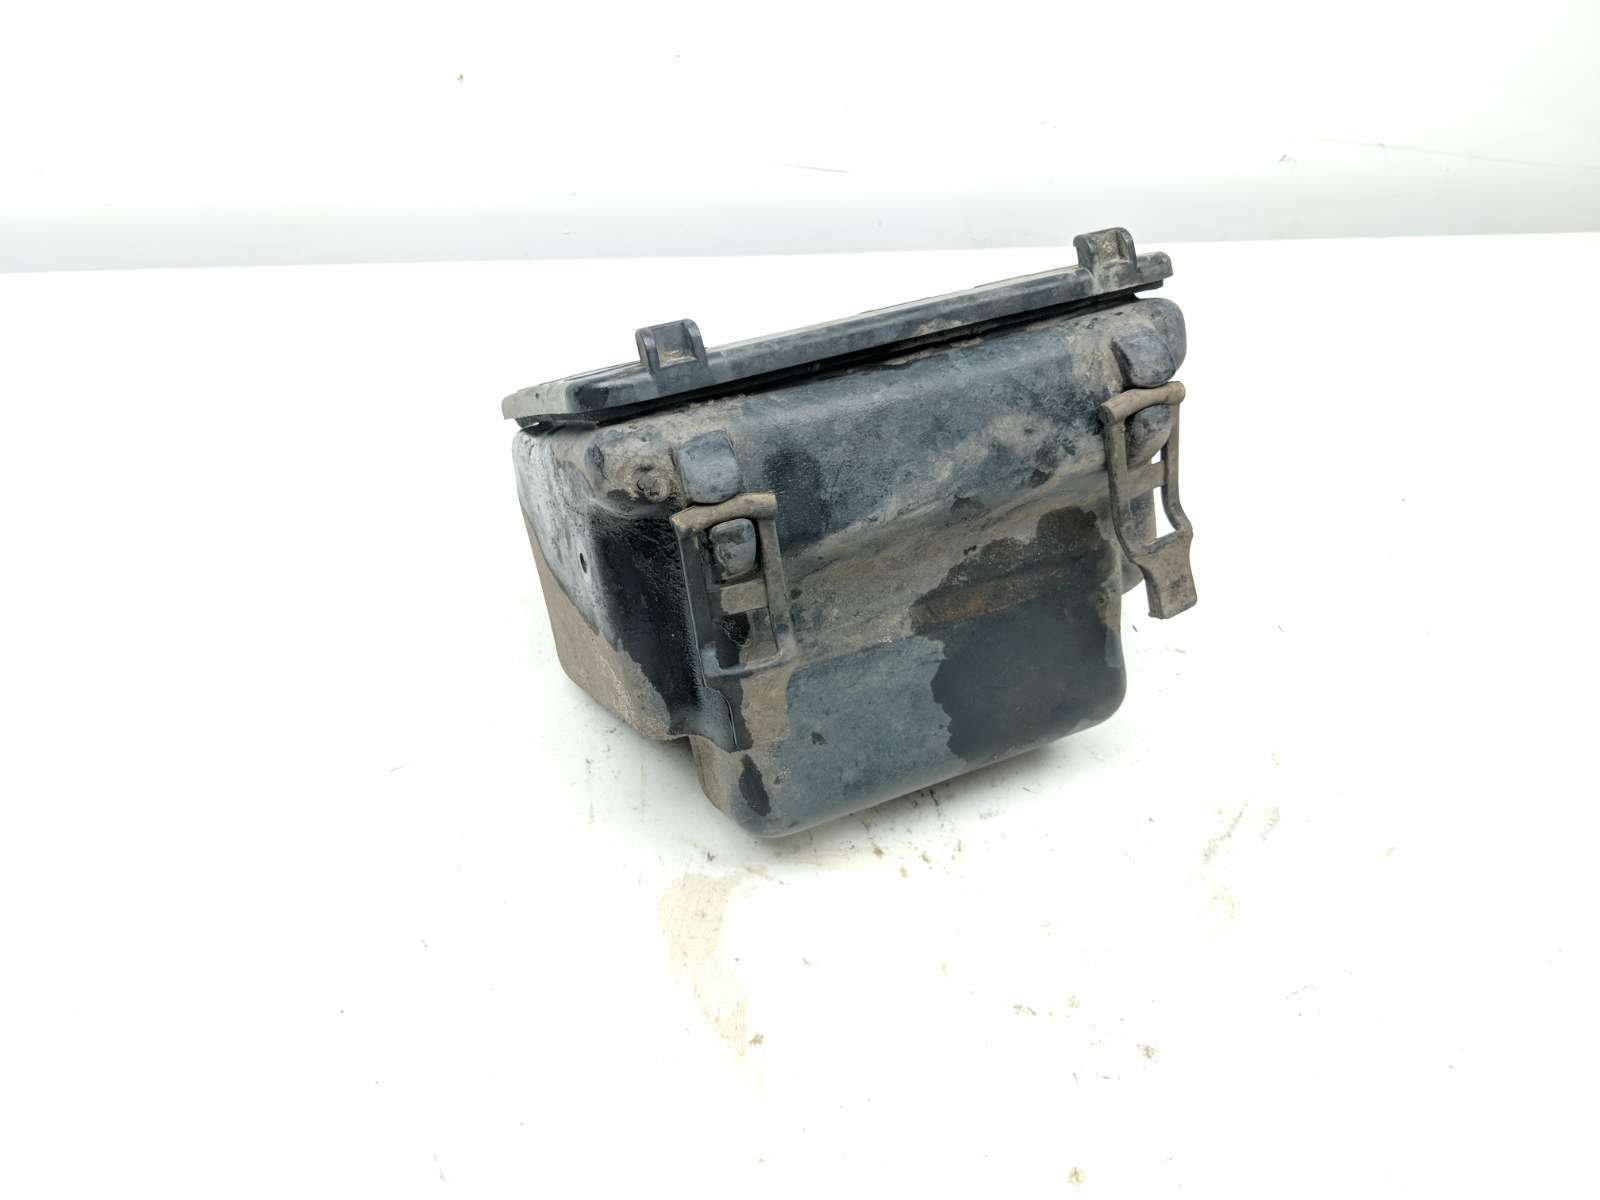 01 Yamaha Grizzly 600 Storage Box Compartment